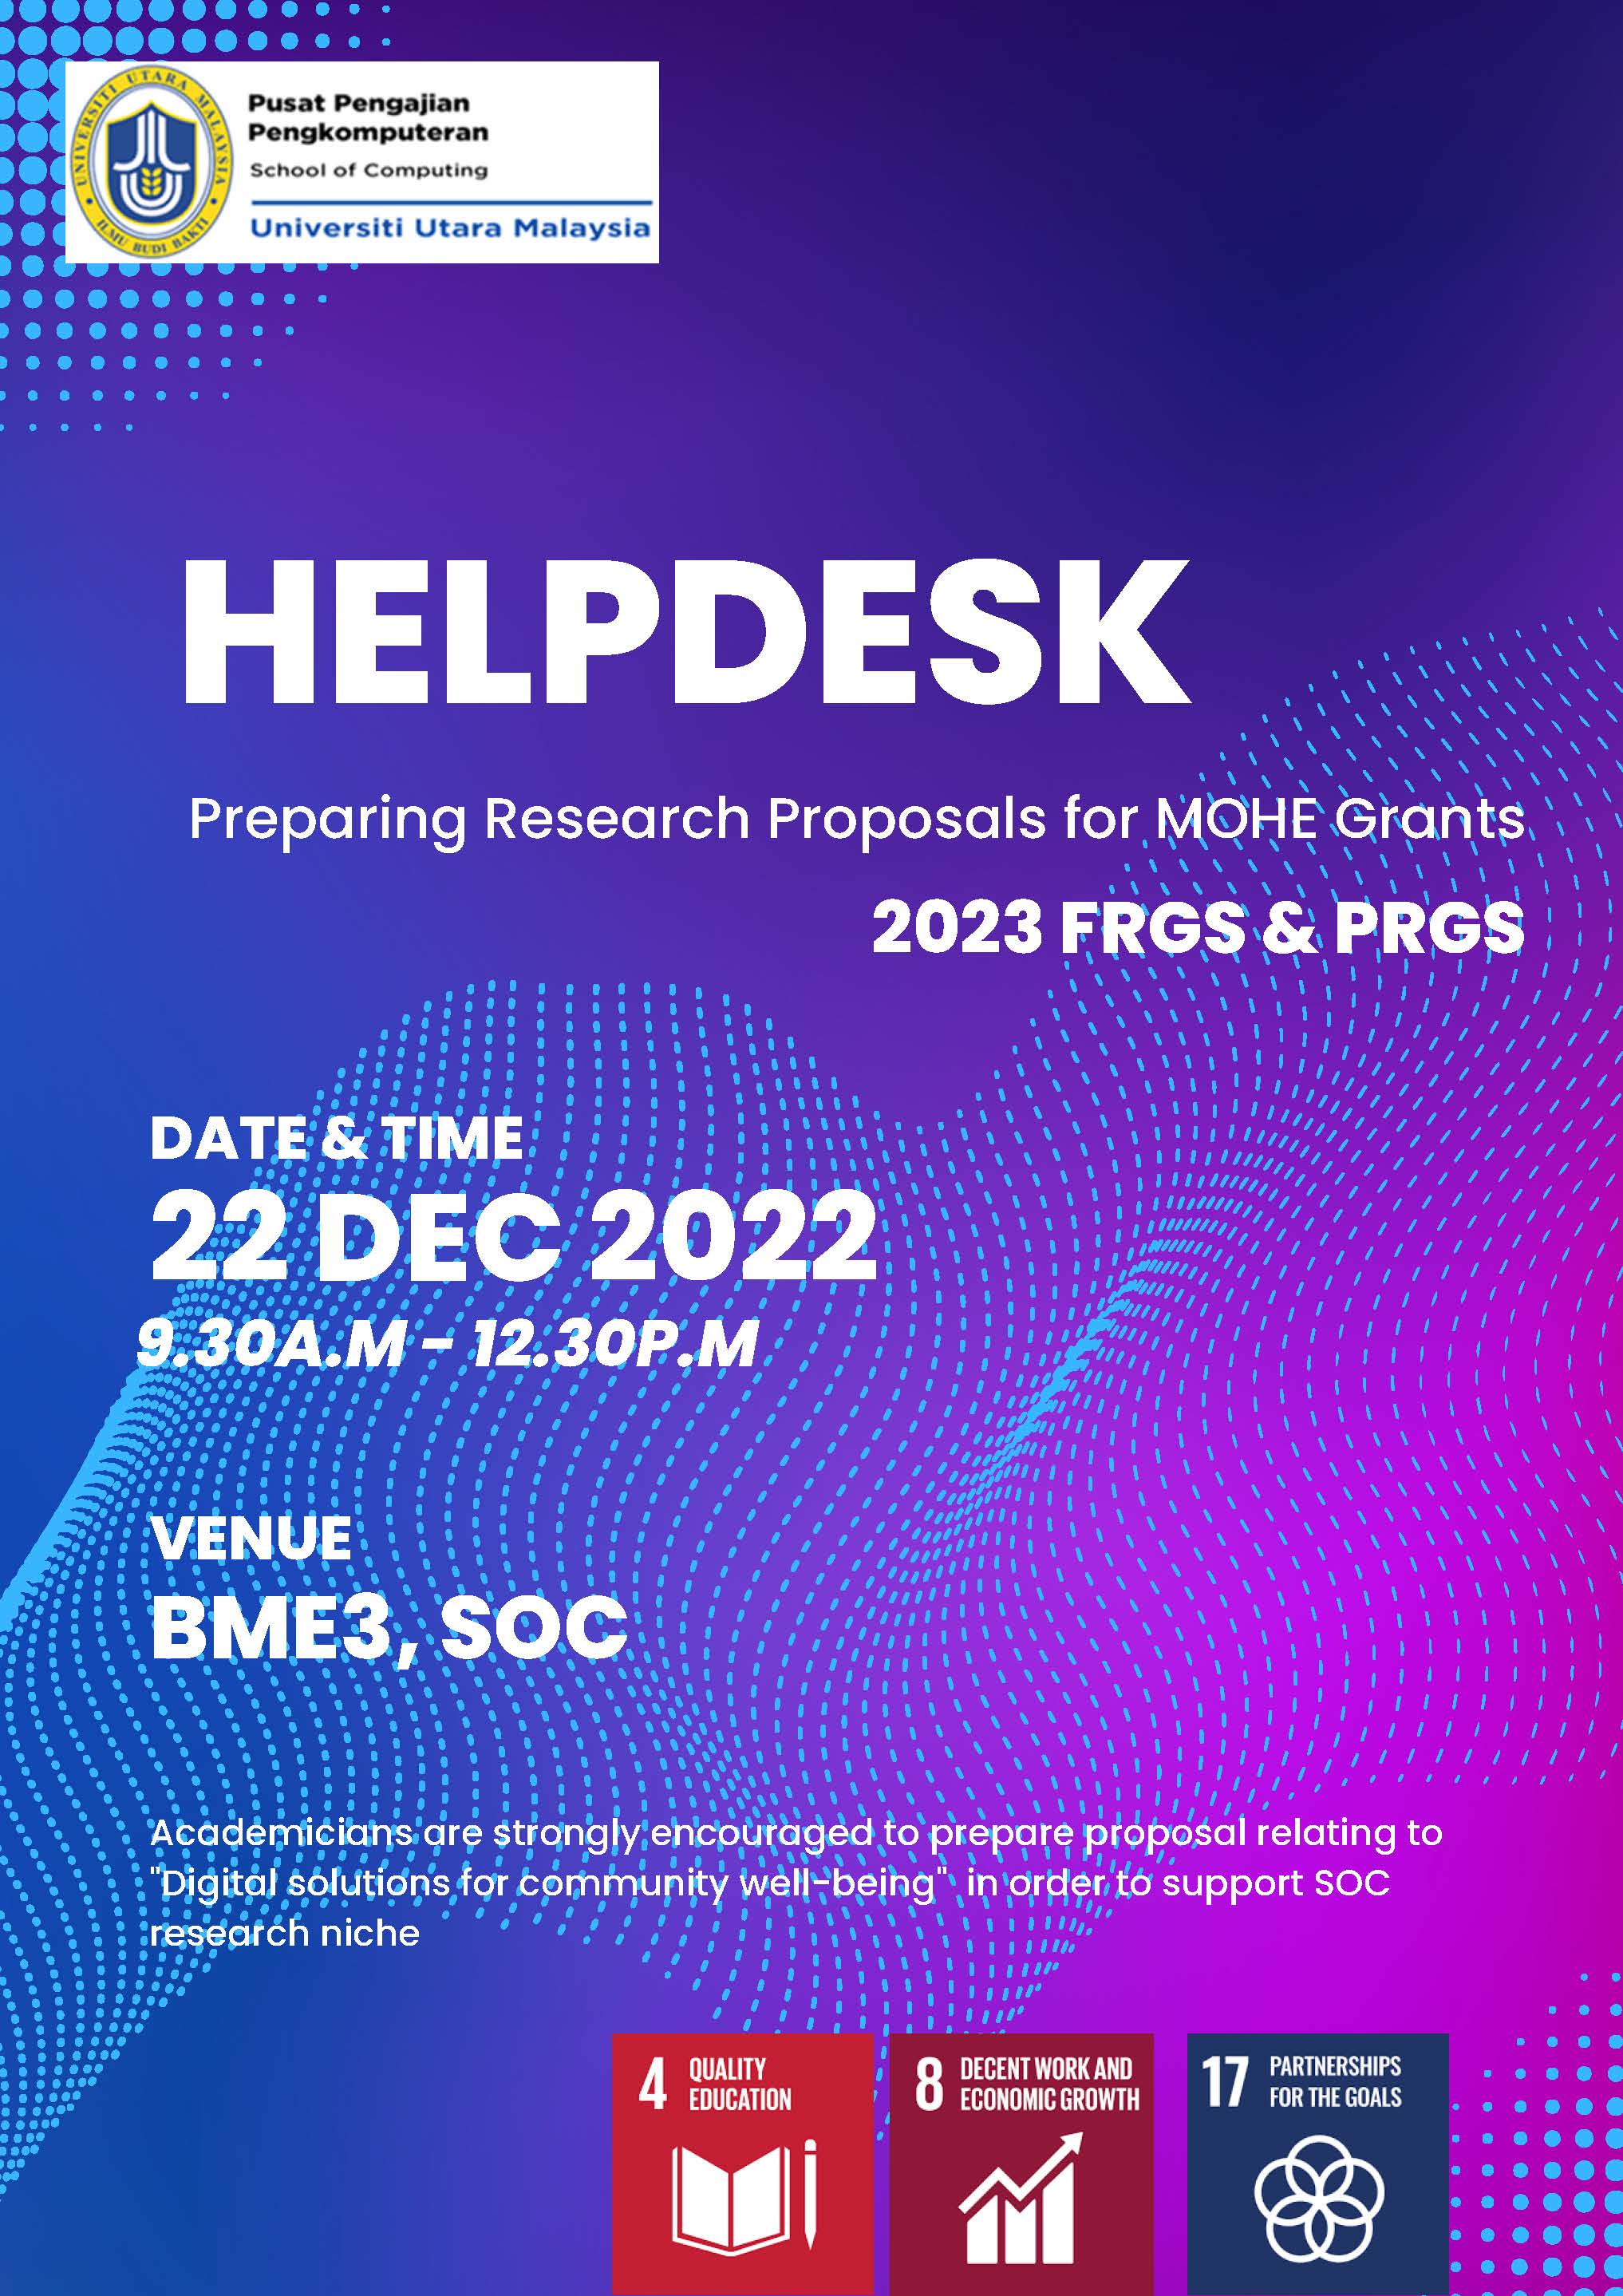 2 Helpdesk Preparing Research Proposal for MOHE Grants